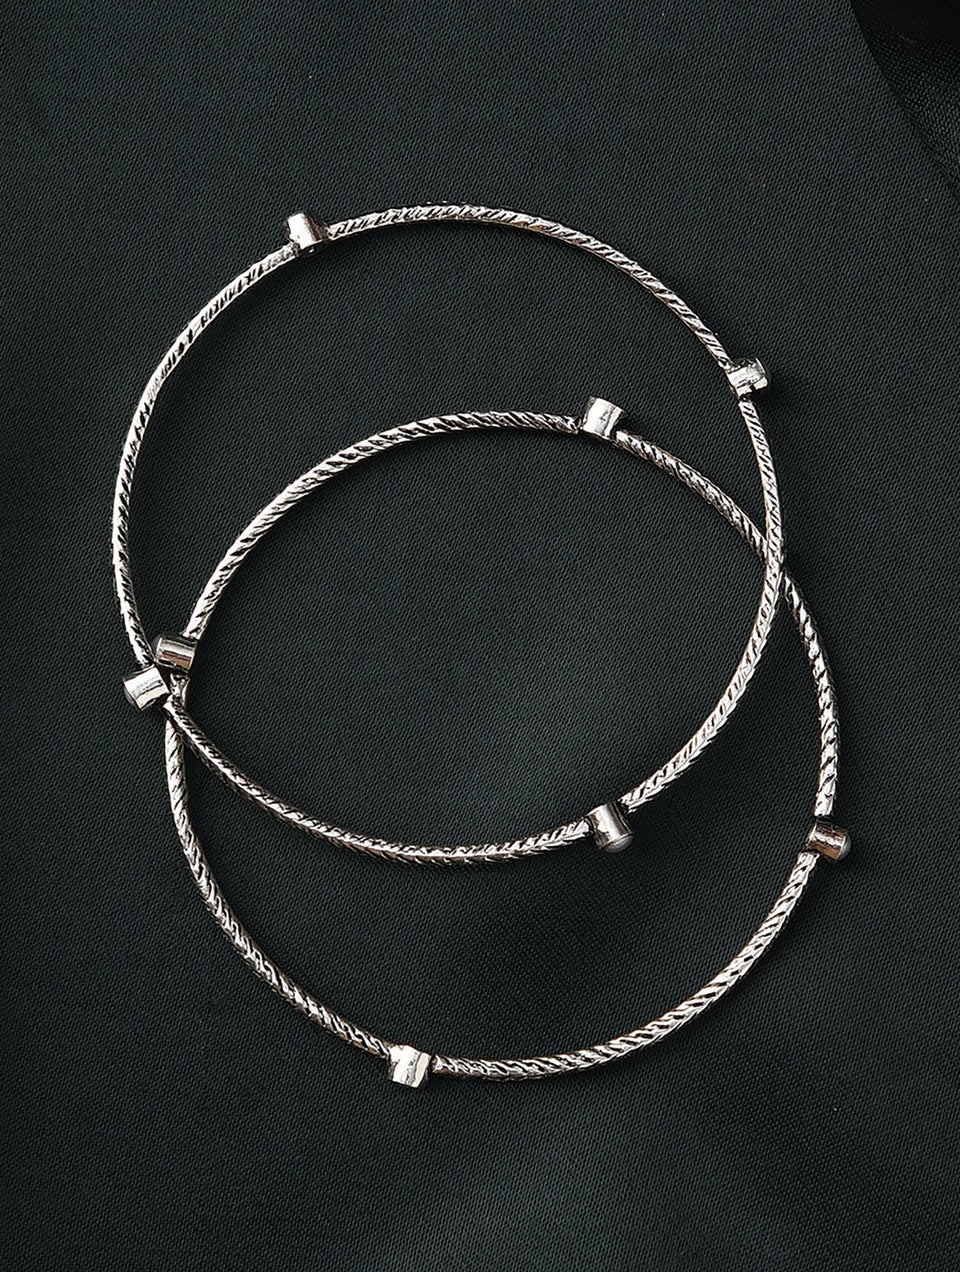 Women Tribal Silver Bangle with Pearls (Pair)